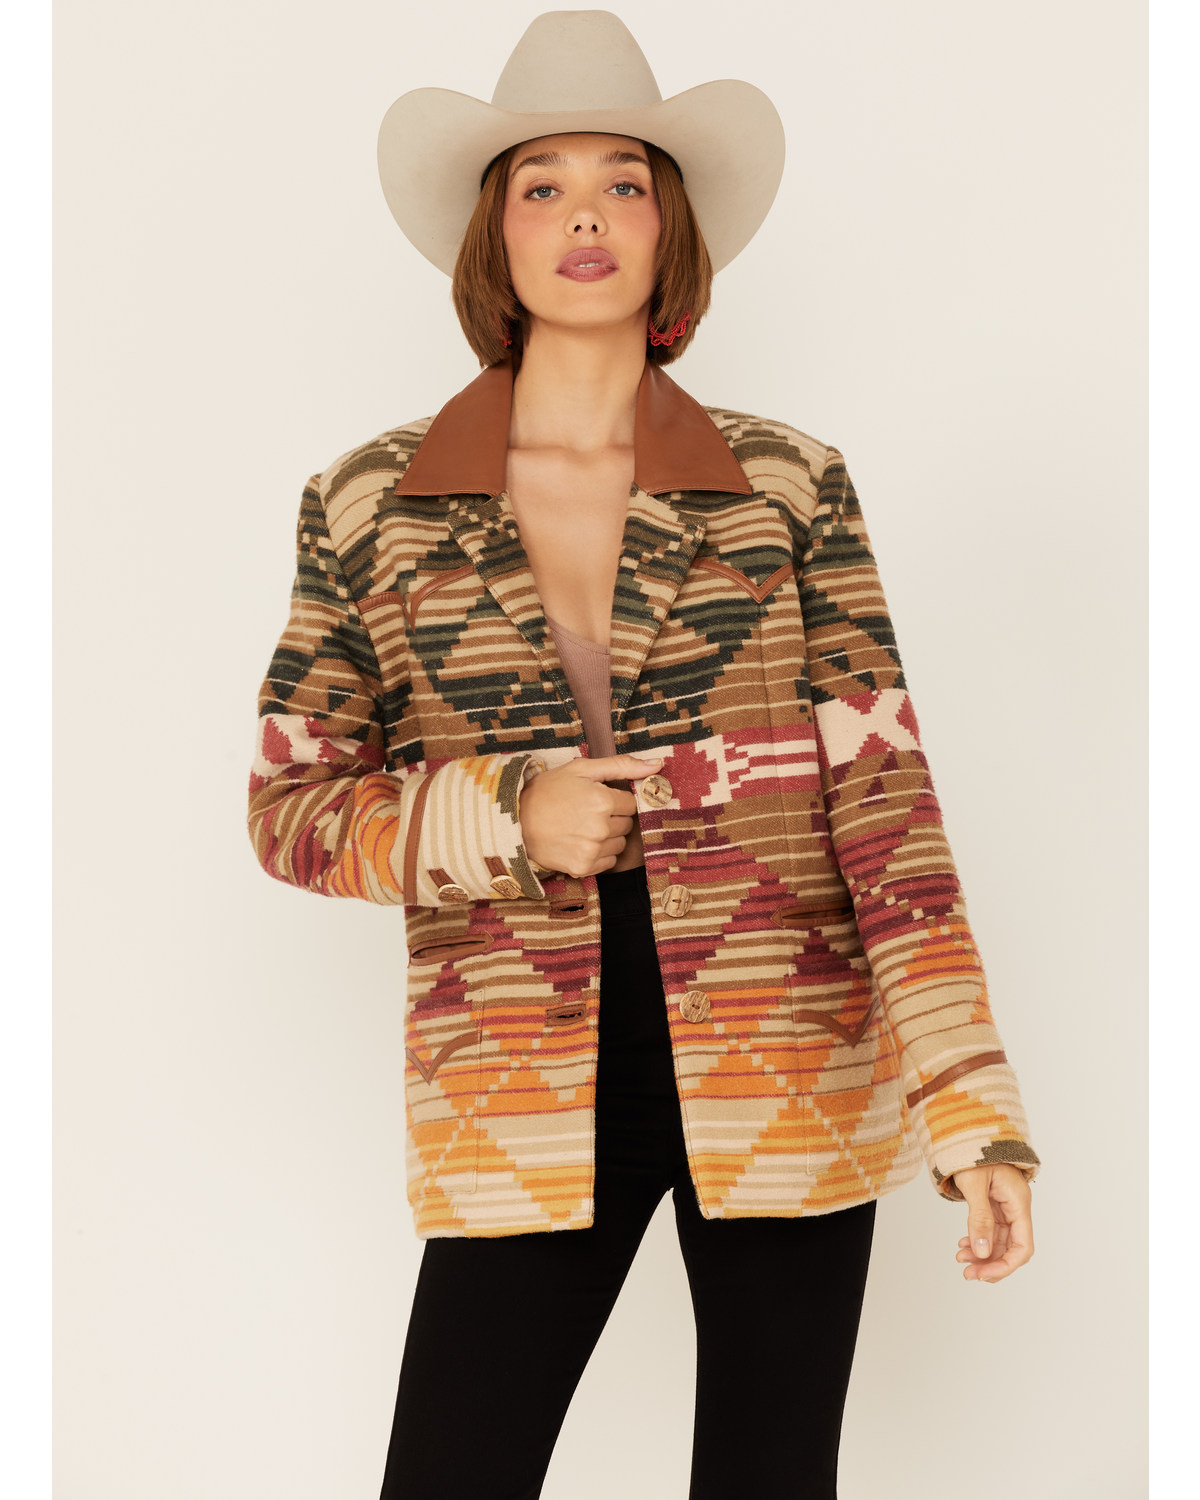 Double D Ranch Women's Serape Embroidered Blanket Jacket